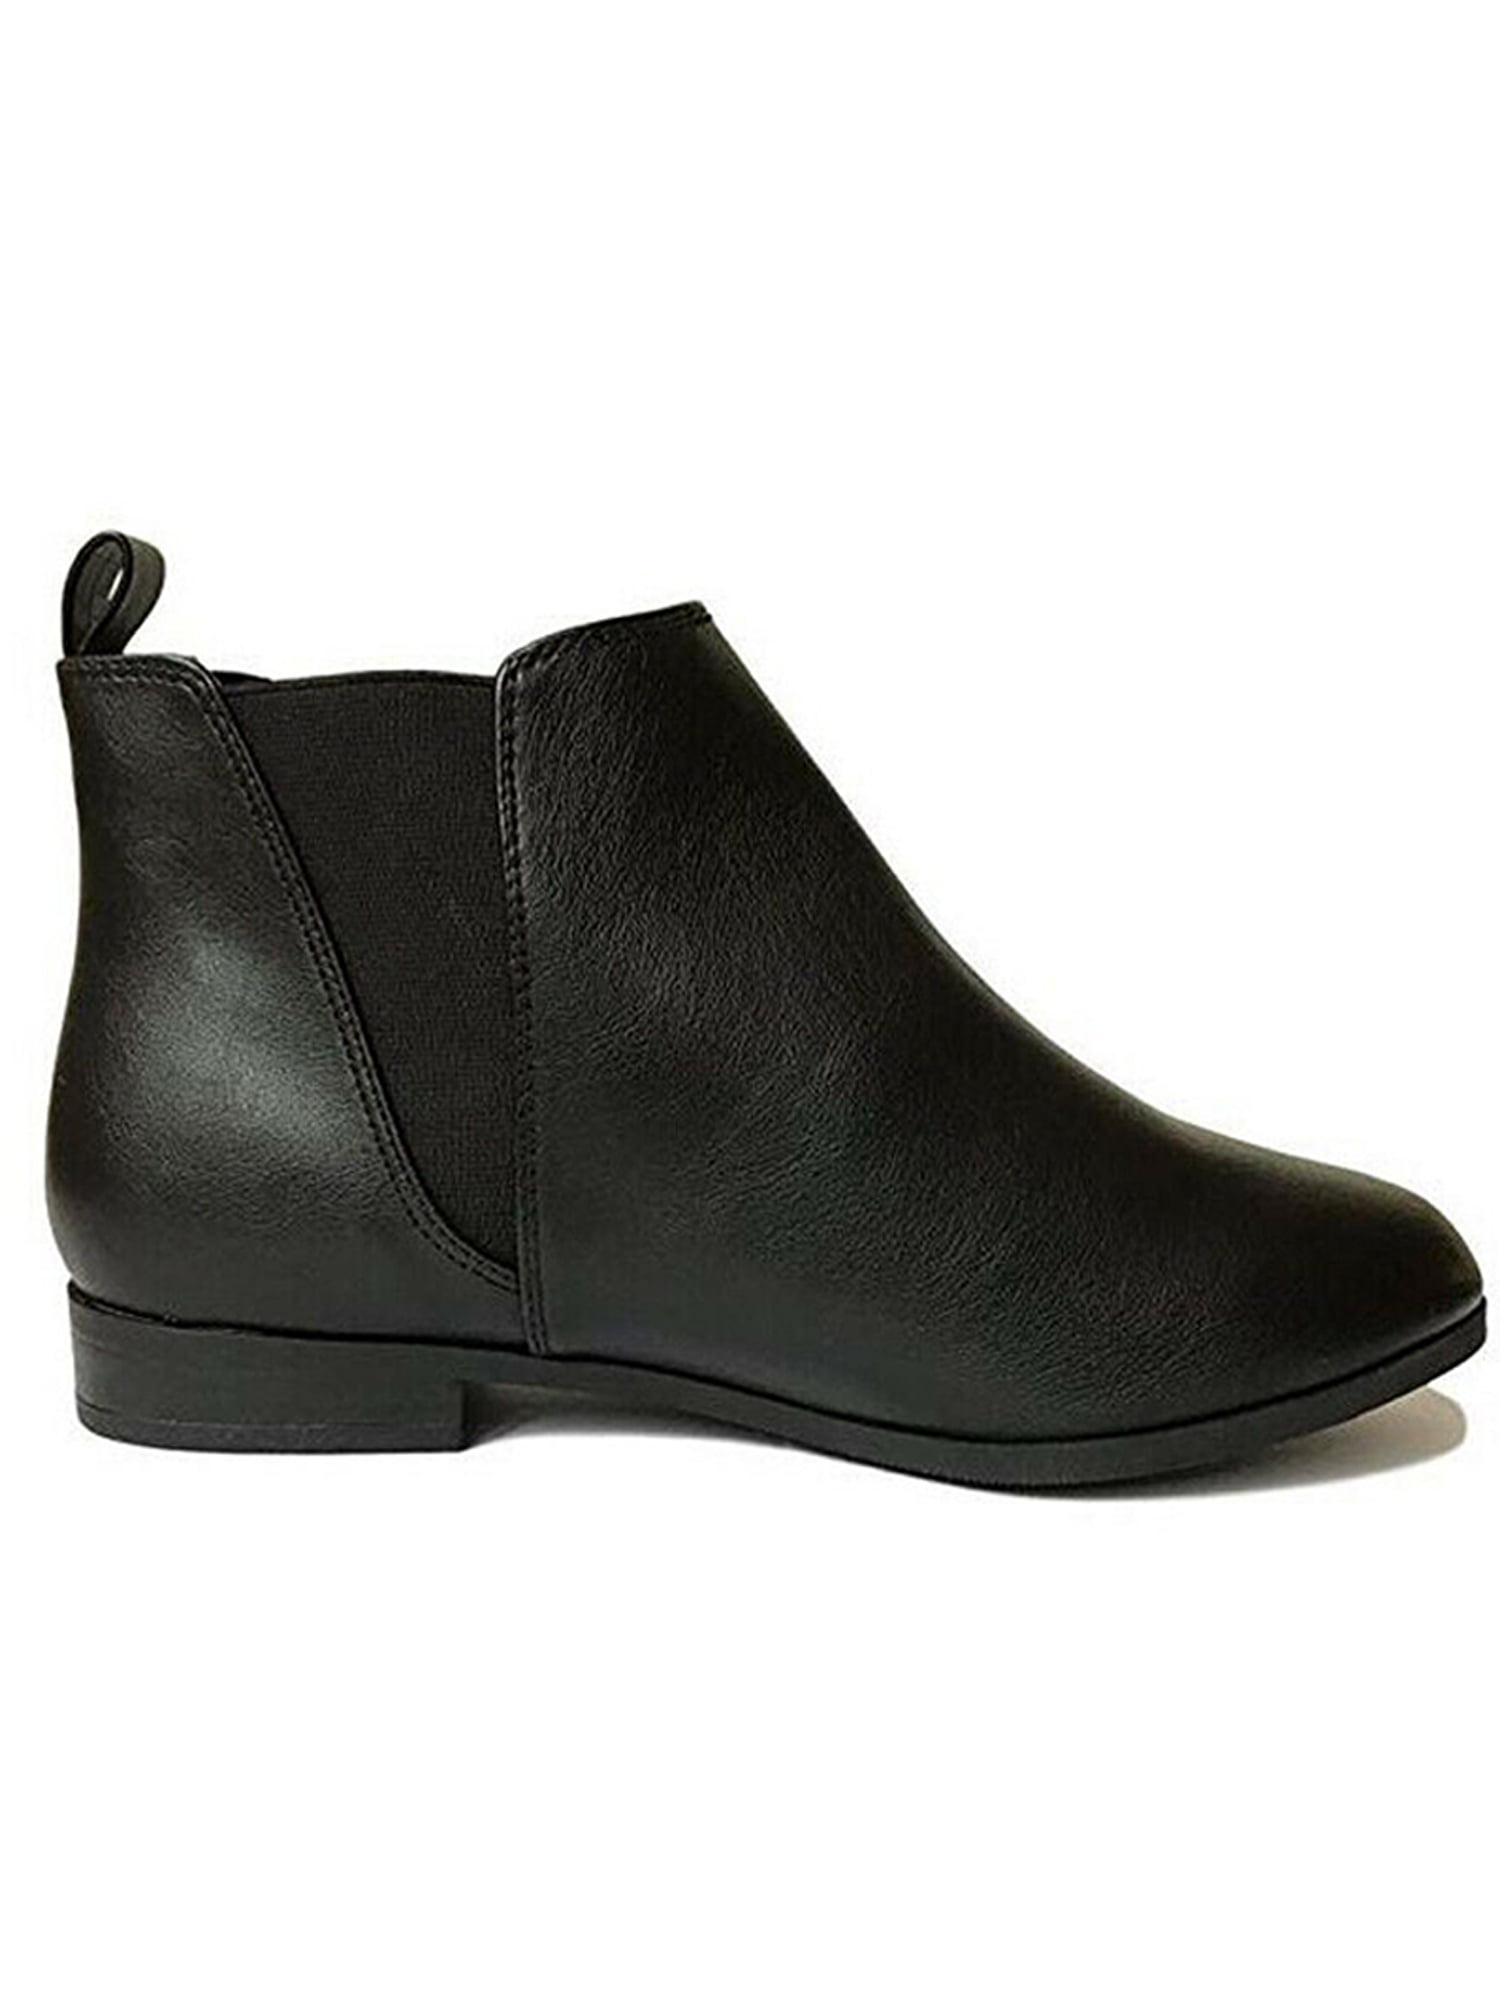 Women's Chelsea Low Heel Ankle Boots Pull On Leather Oxfords Black Shoes Comfort